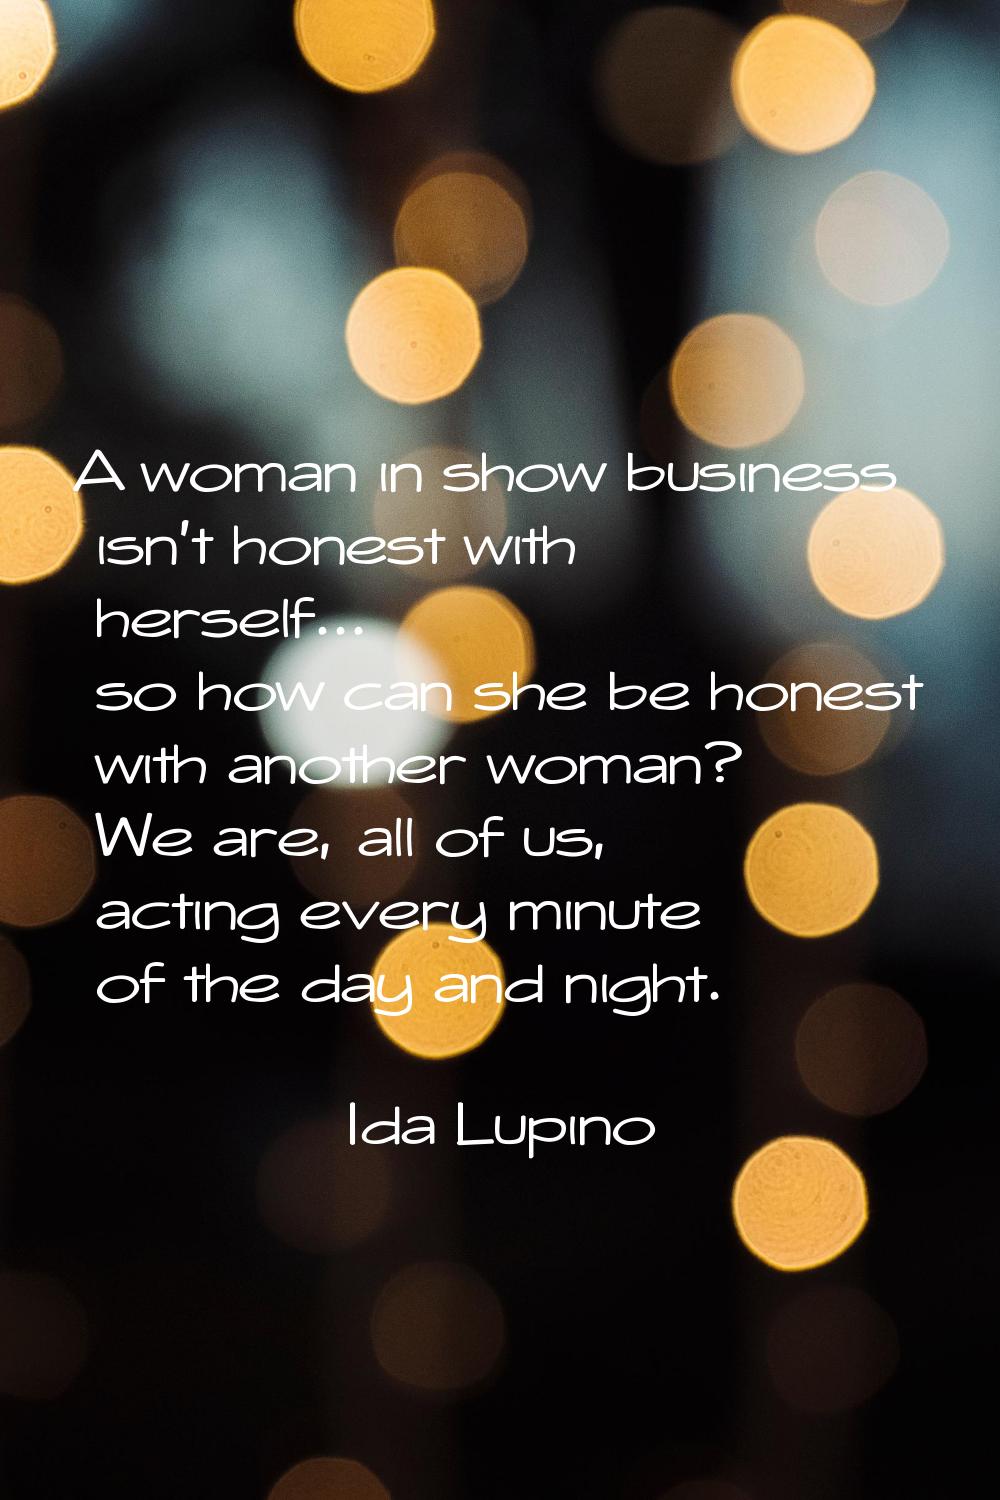 A woman in show business isn't honest with herself... so how can she be honest with another woman? 